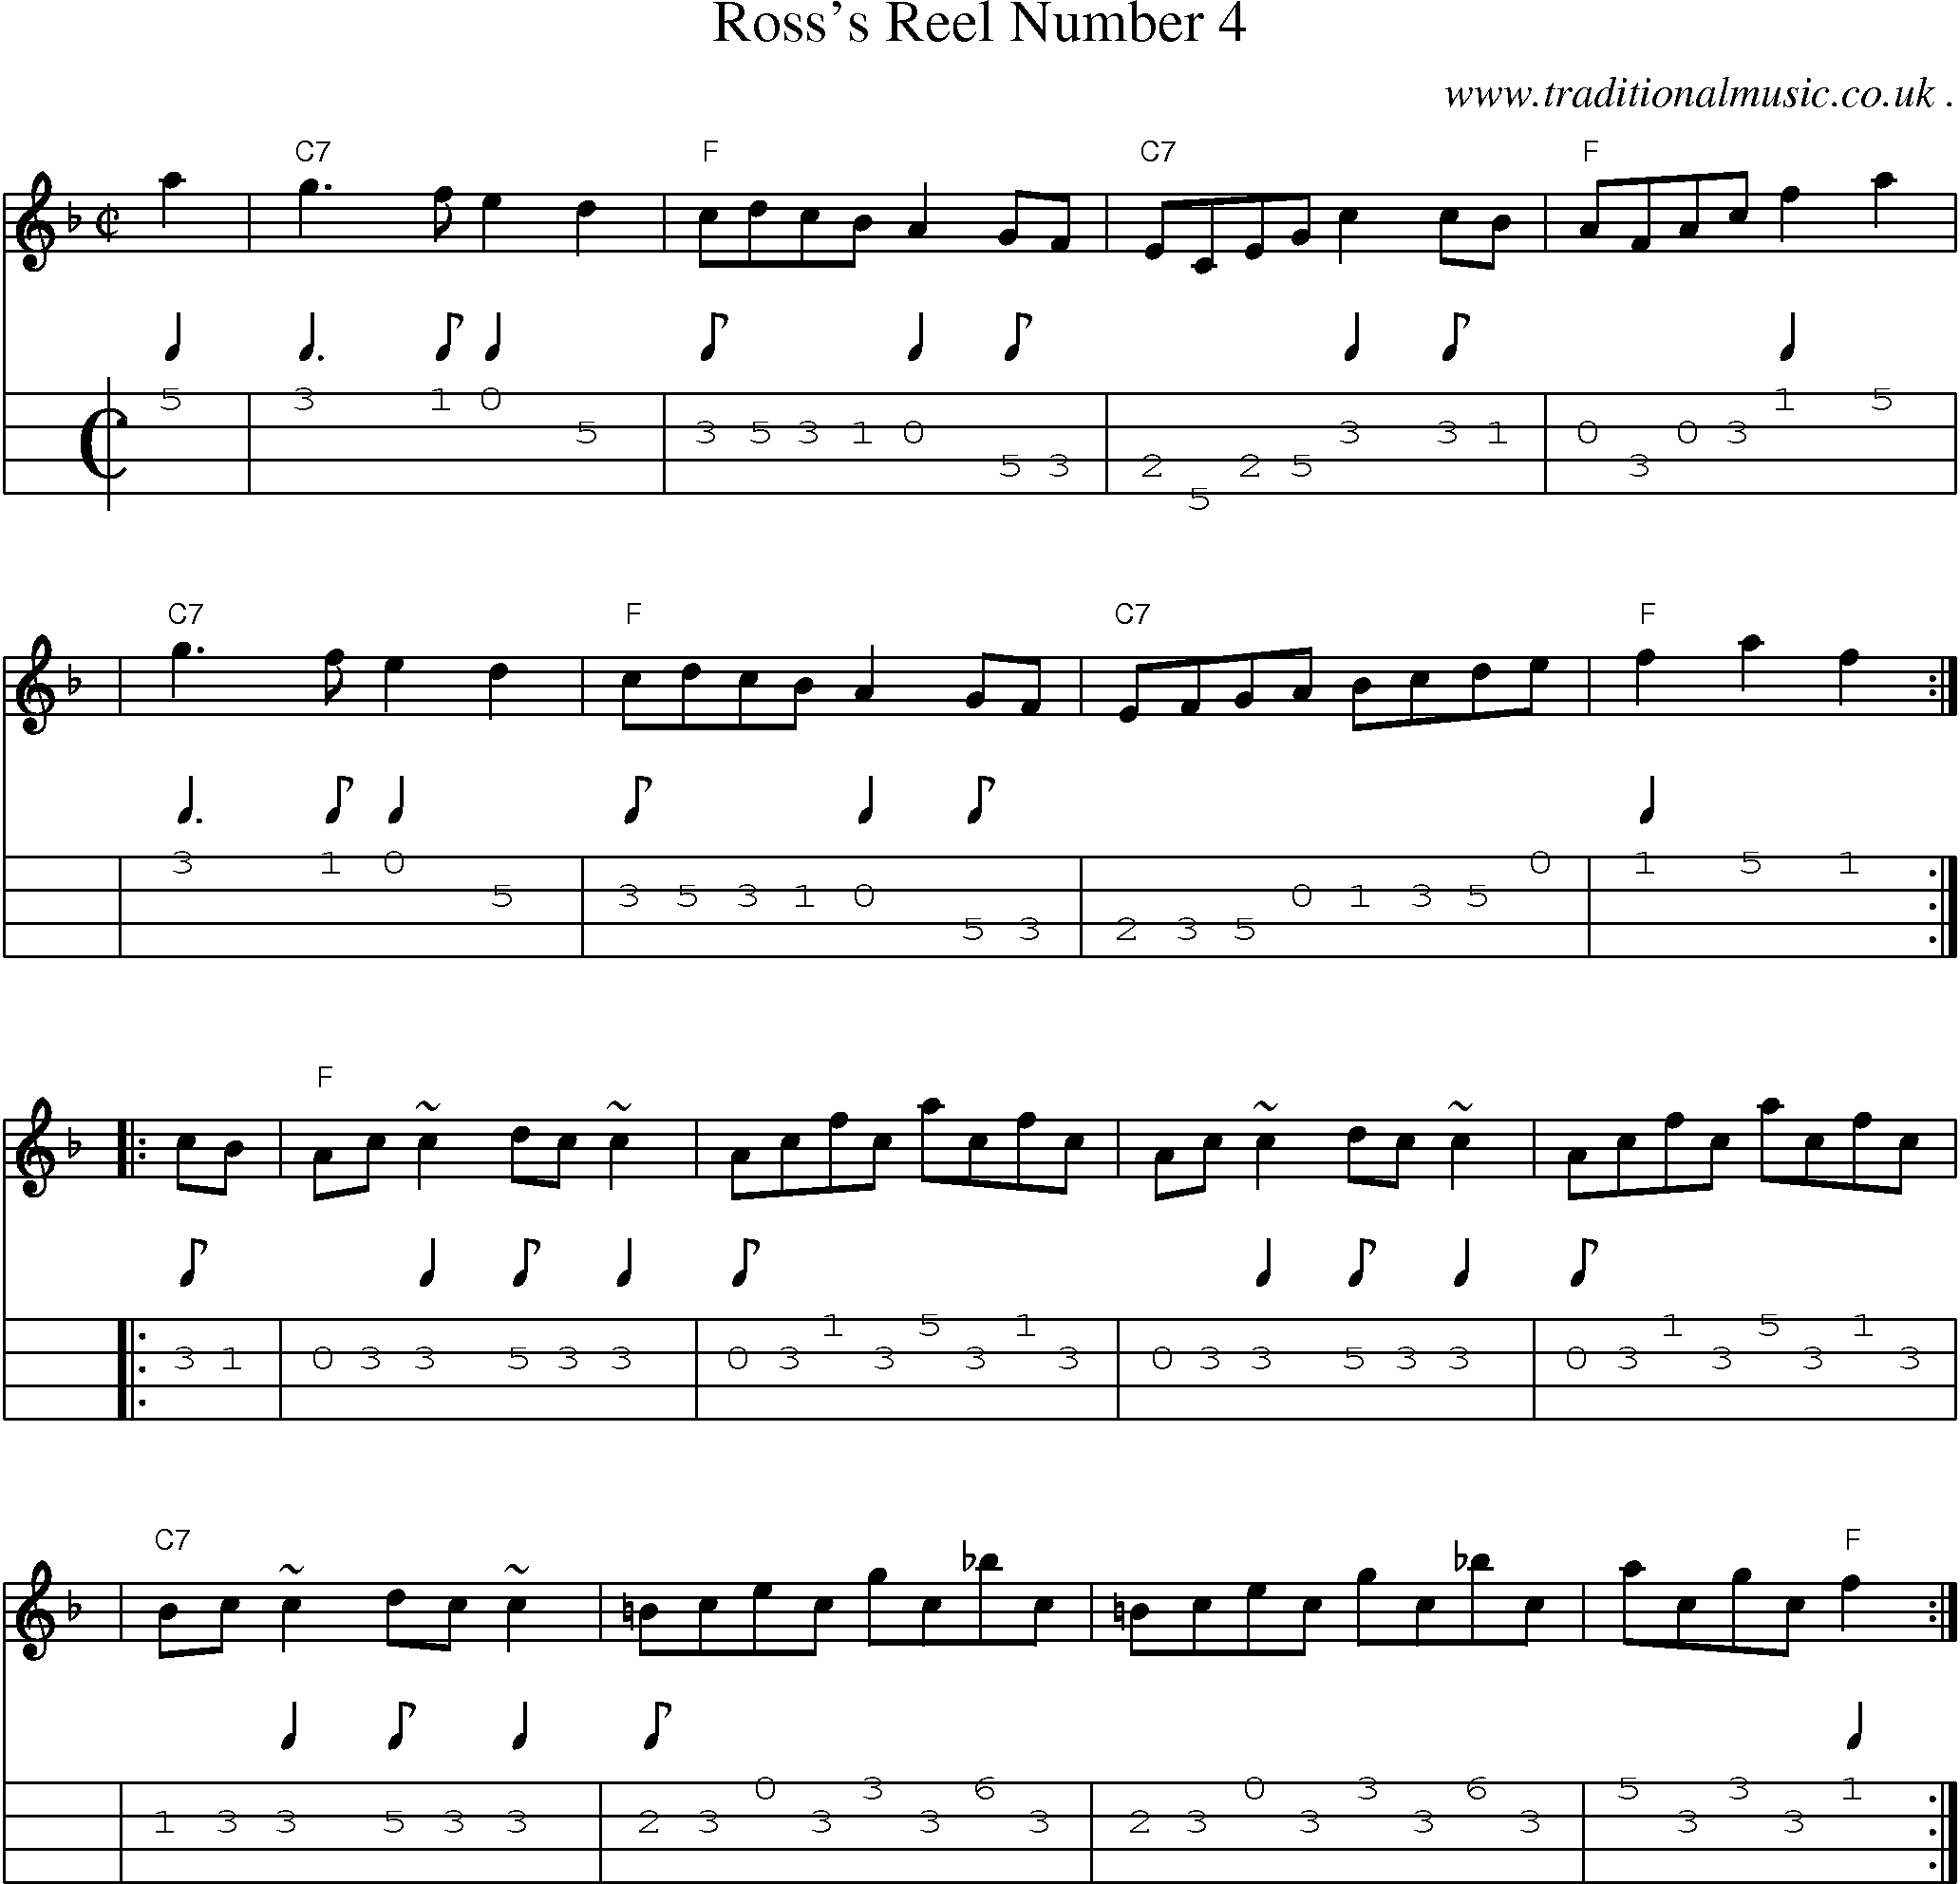 Sheet-music  score, Chords and Mandolin Tabs for Rosss Reel Number 4